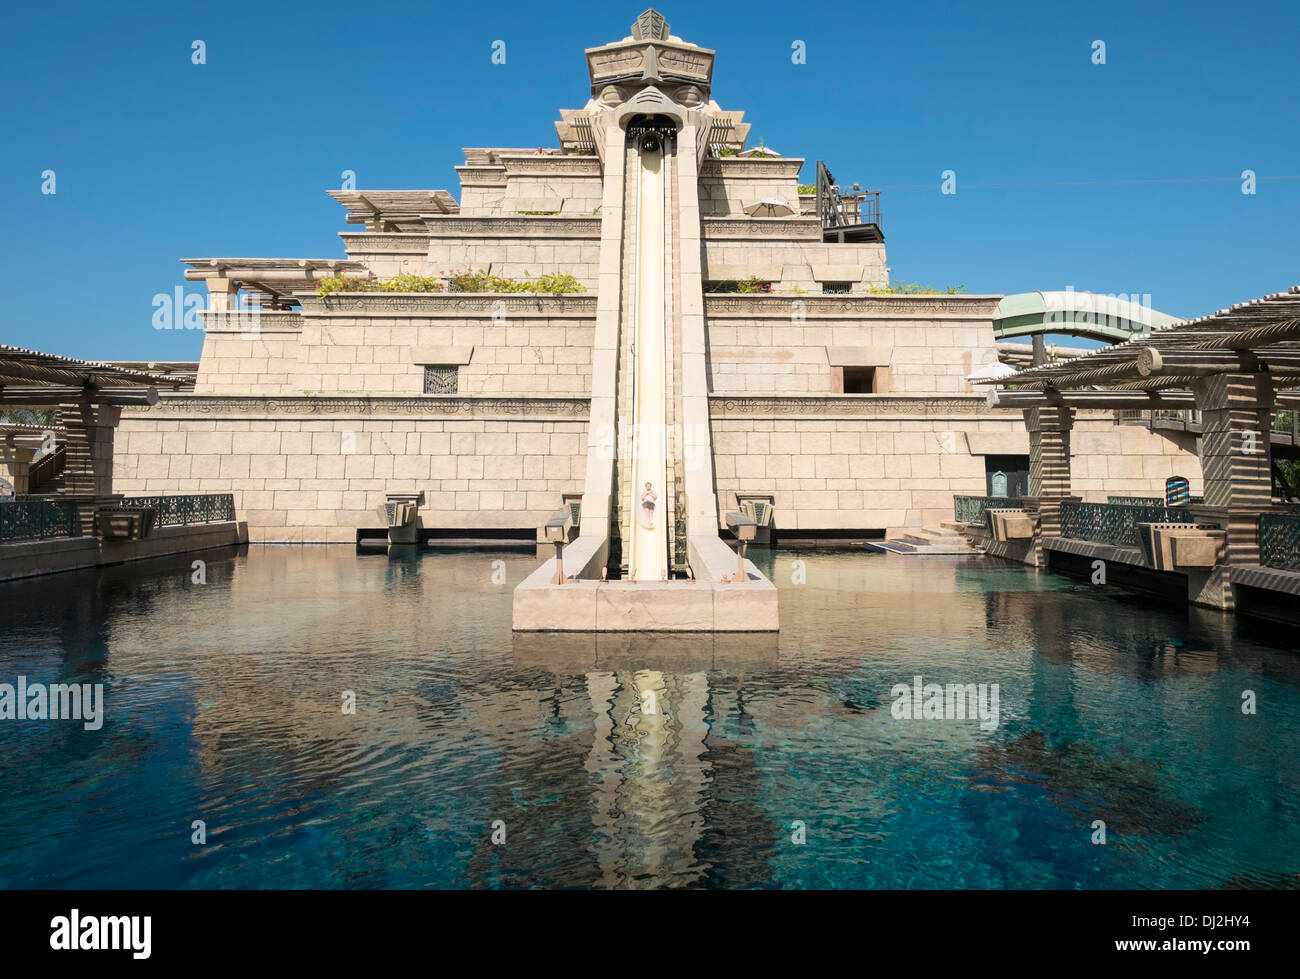 Leap of Faith waterslide at Aquaventure water park at the Atlantis Hotel on The Palm island in Dubai United Arab Emirates Stock Photo